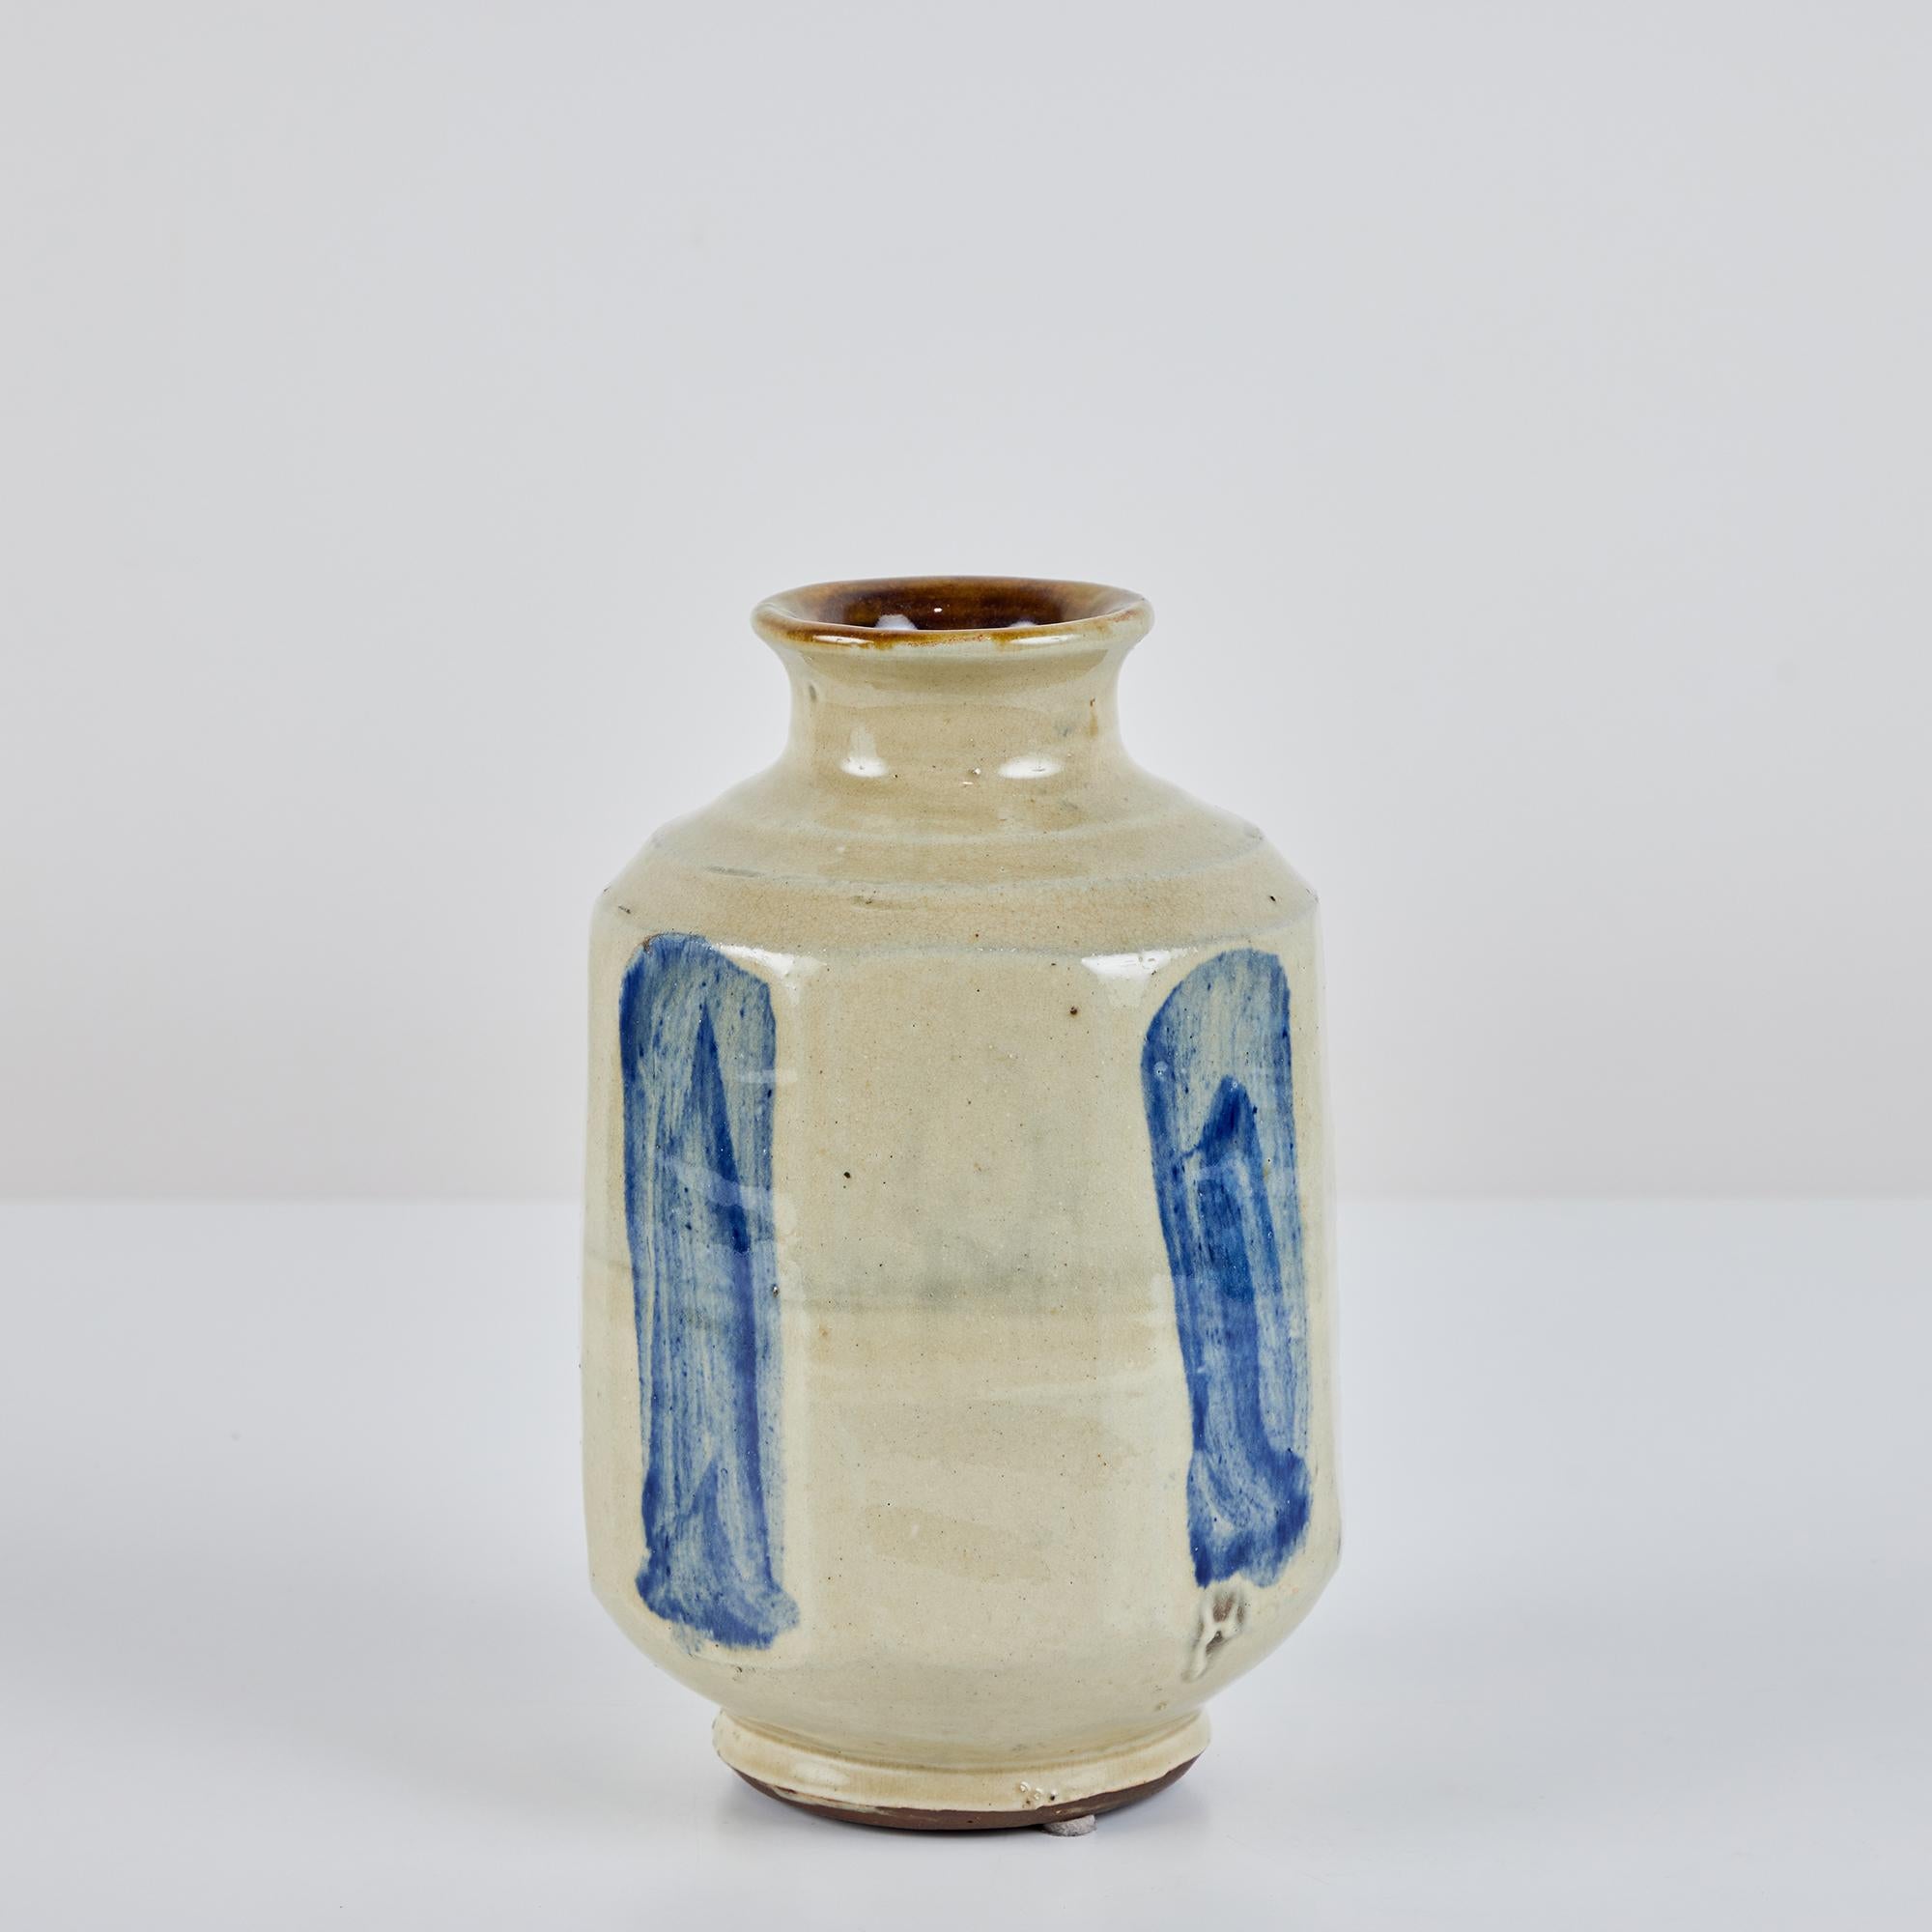 An oblong octagonal studio pottery vase with a flared rim. This vessel features an all over beige glaze with four blue bush strokes.
Signed on the underside.

Dimensions
5.5